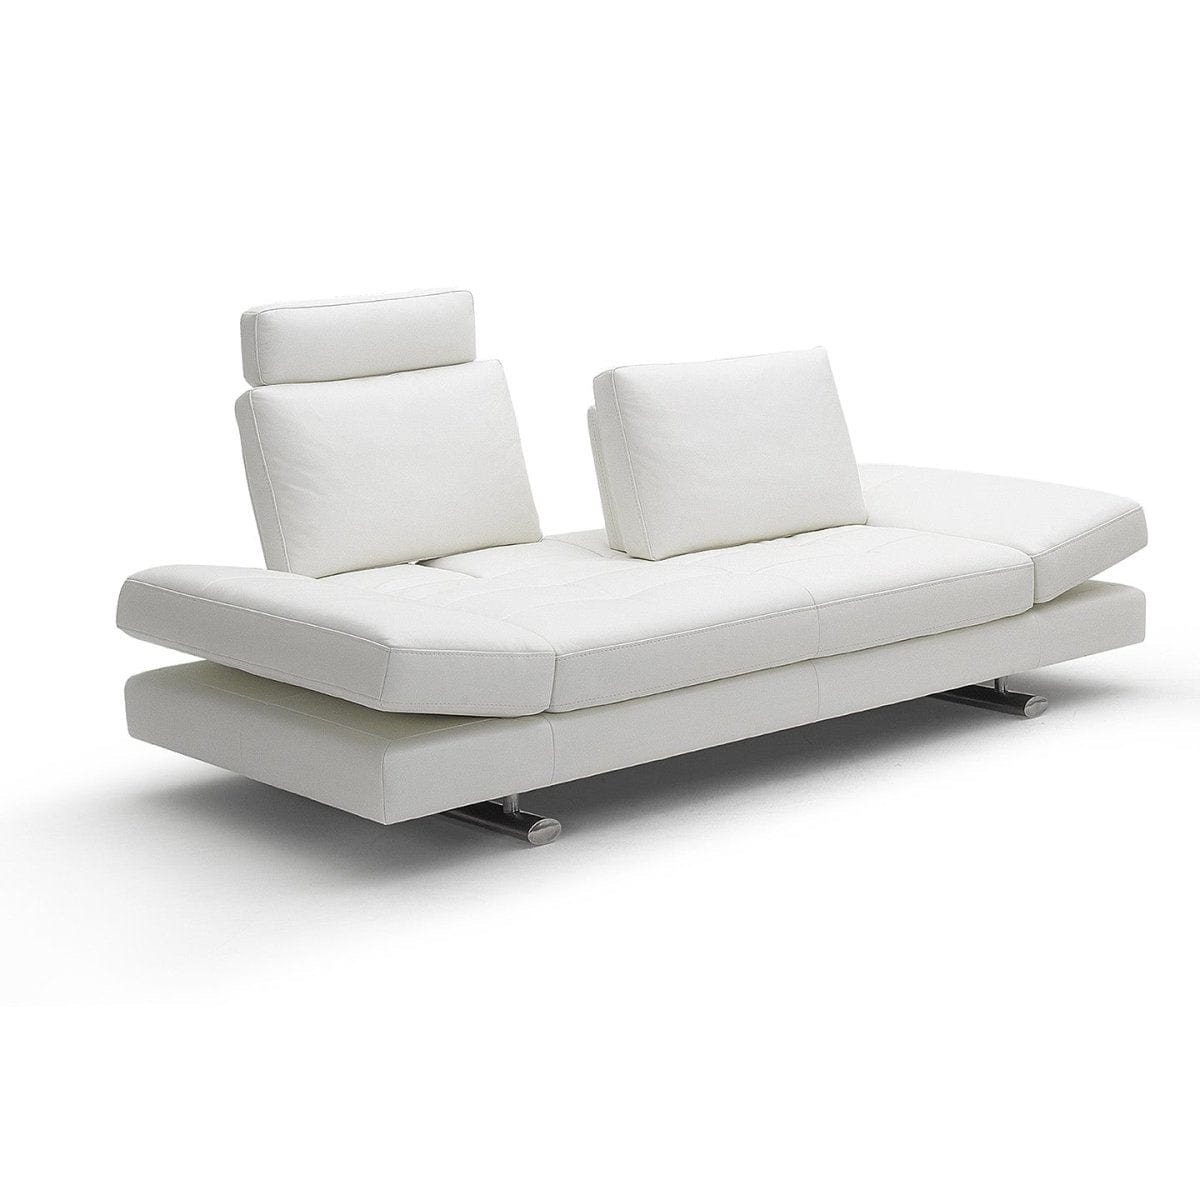 #1 KUKA #1372 Top-Grain Leather 2-Seater Daybed Sofa with Adjustable Backrests & Side Arms (Color: BL5652) picket and rail